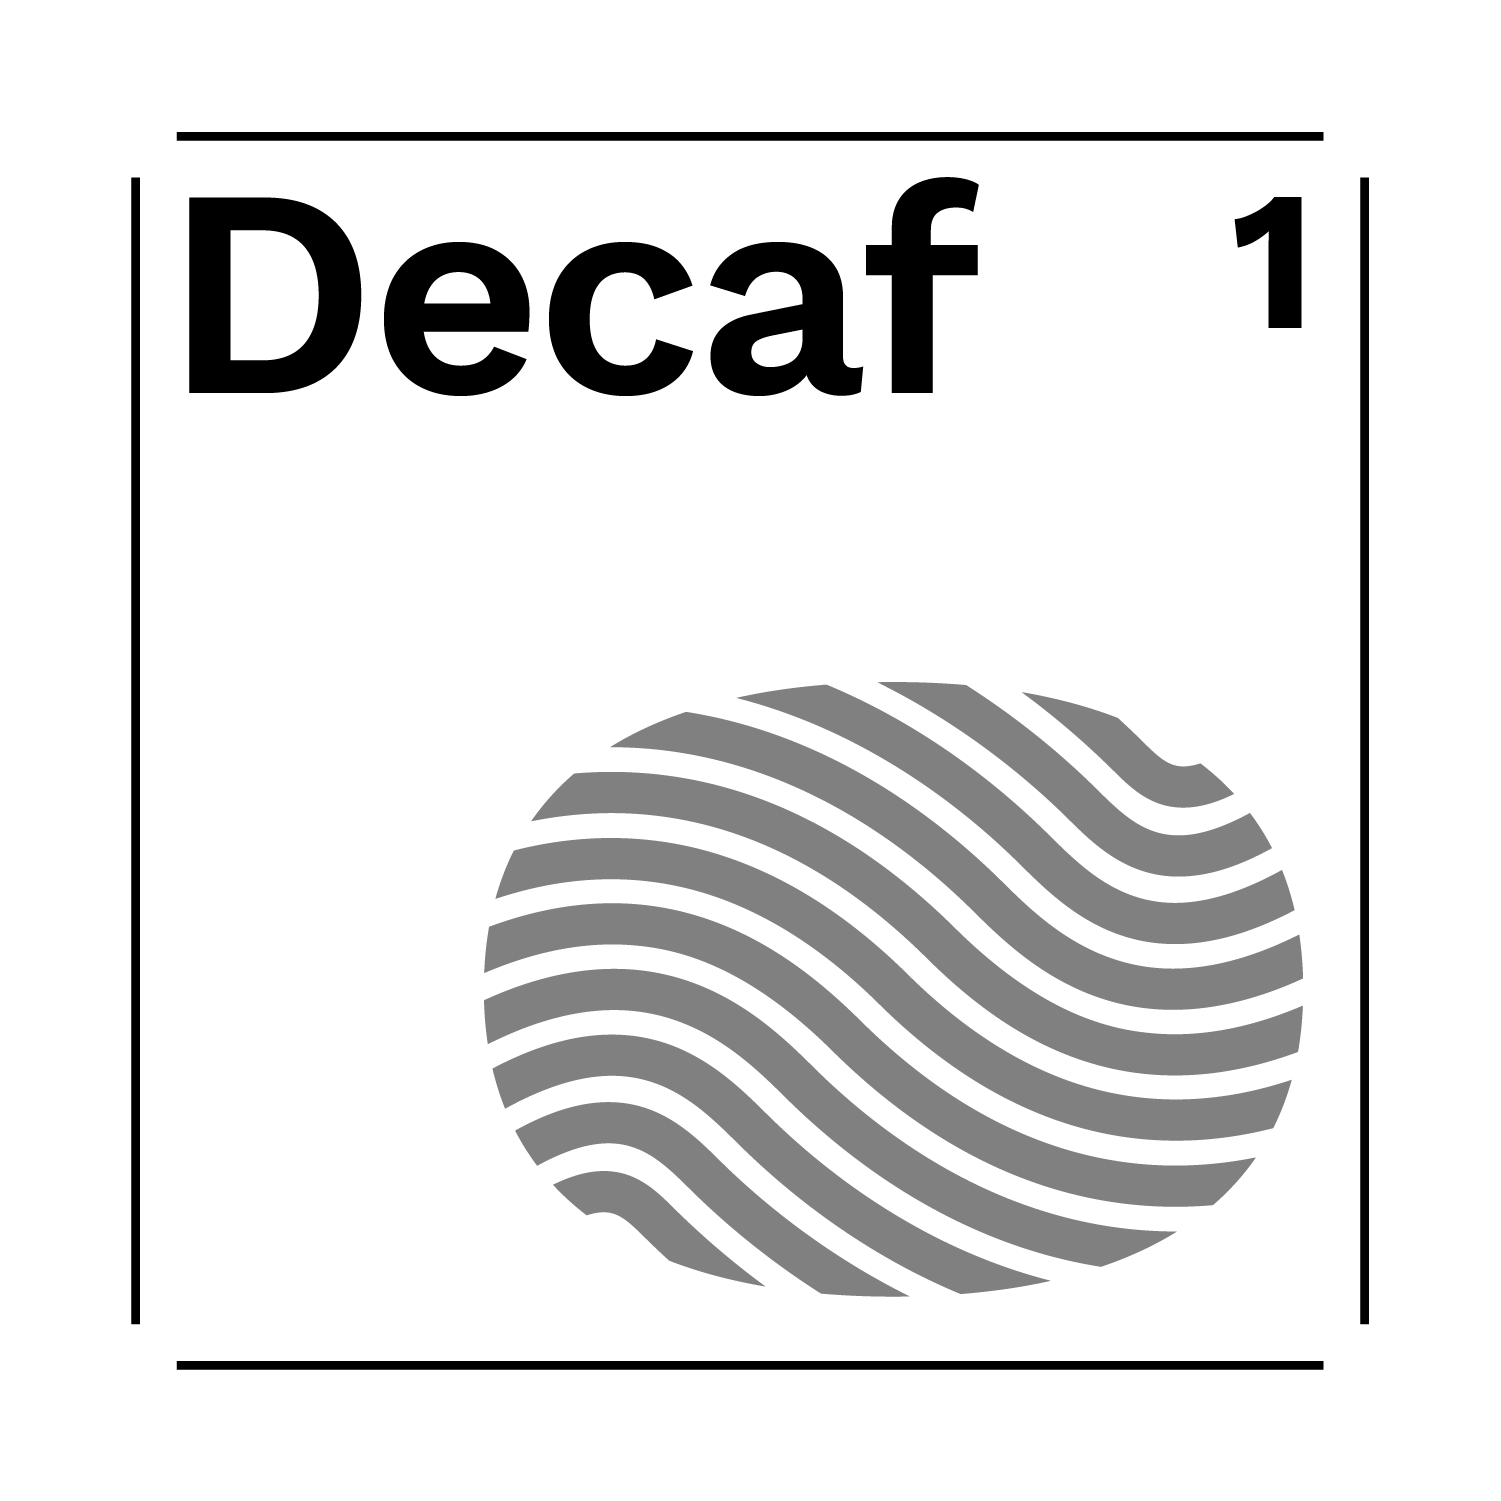 Decaf - Colombia Various Regions Water EA Decaffeination Process